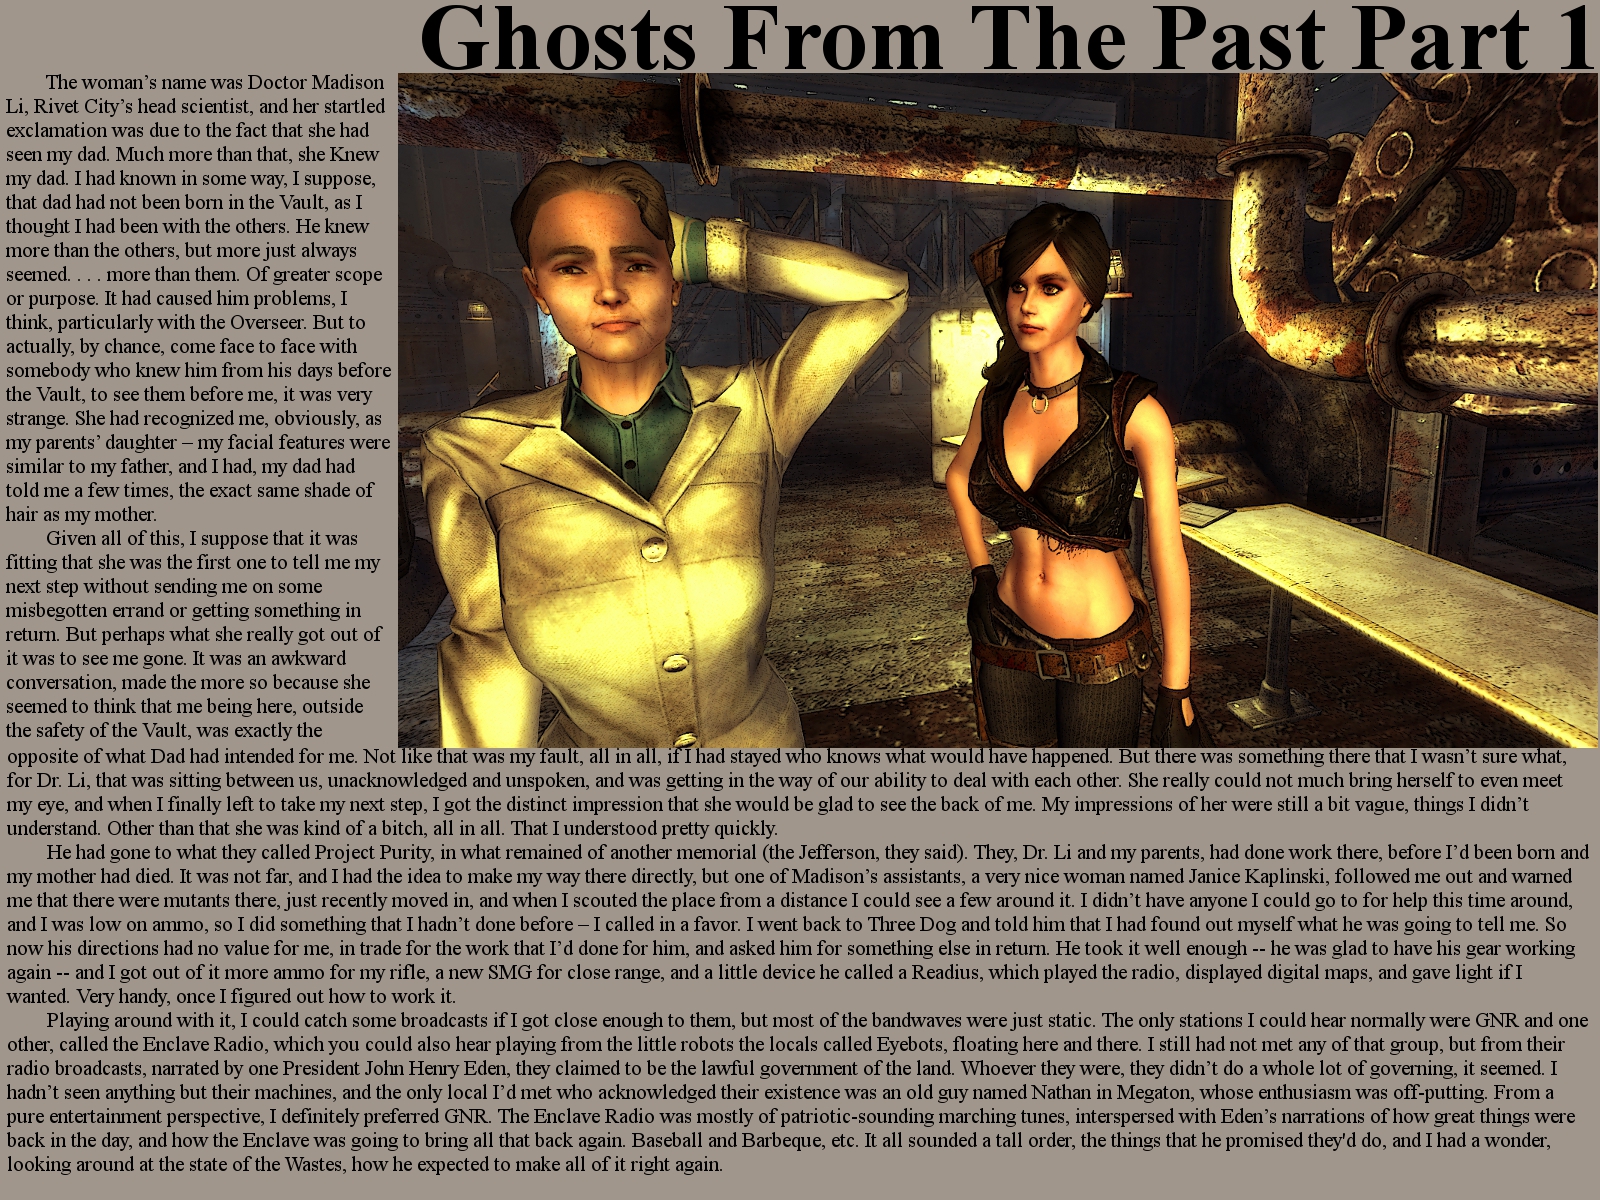 Page 6: Ghosts From The Past 1